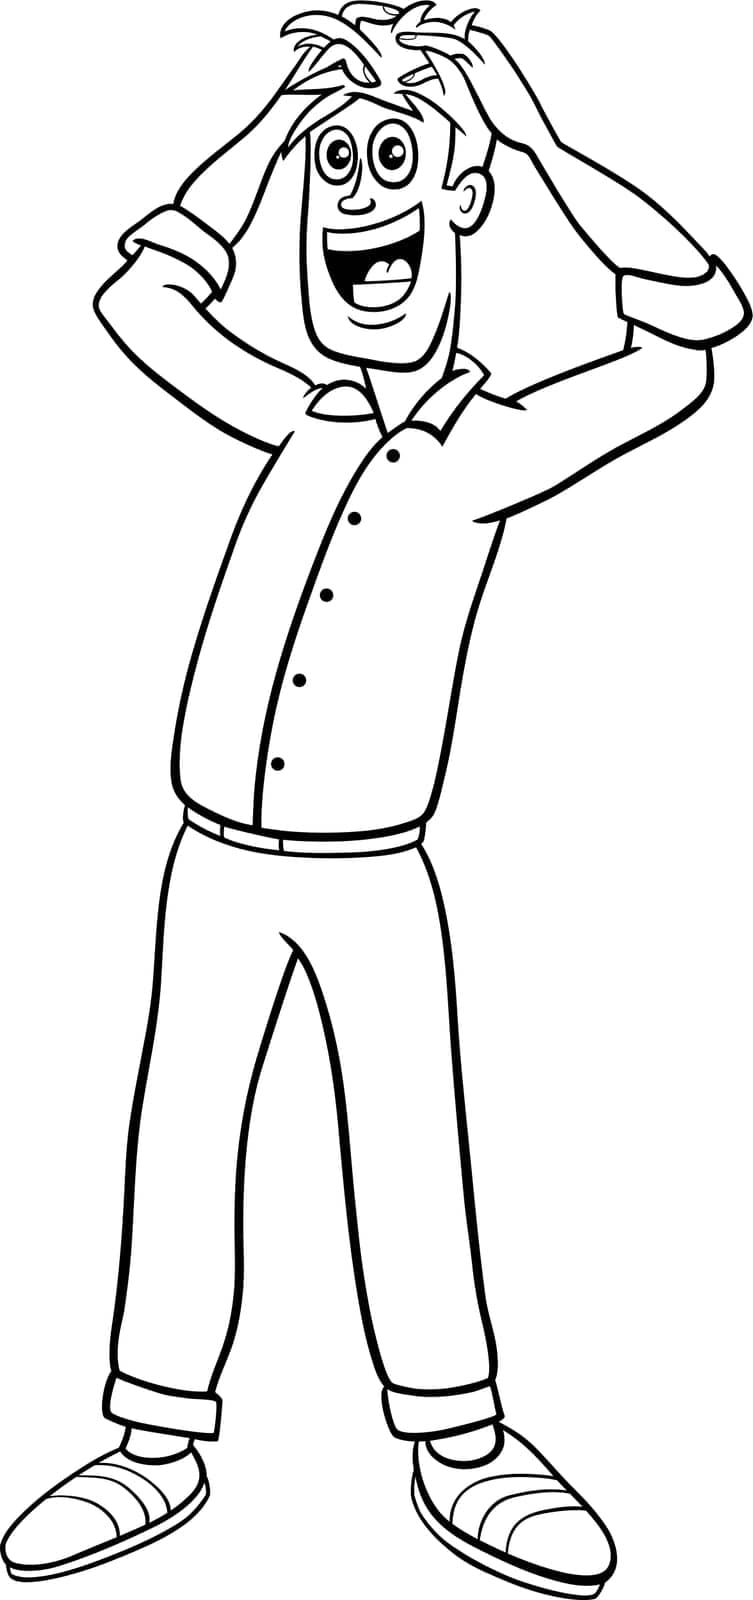 Cartoon illustration of happy or surprised young man or guy comic character coloring page